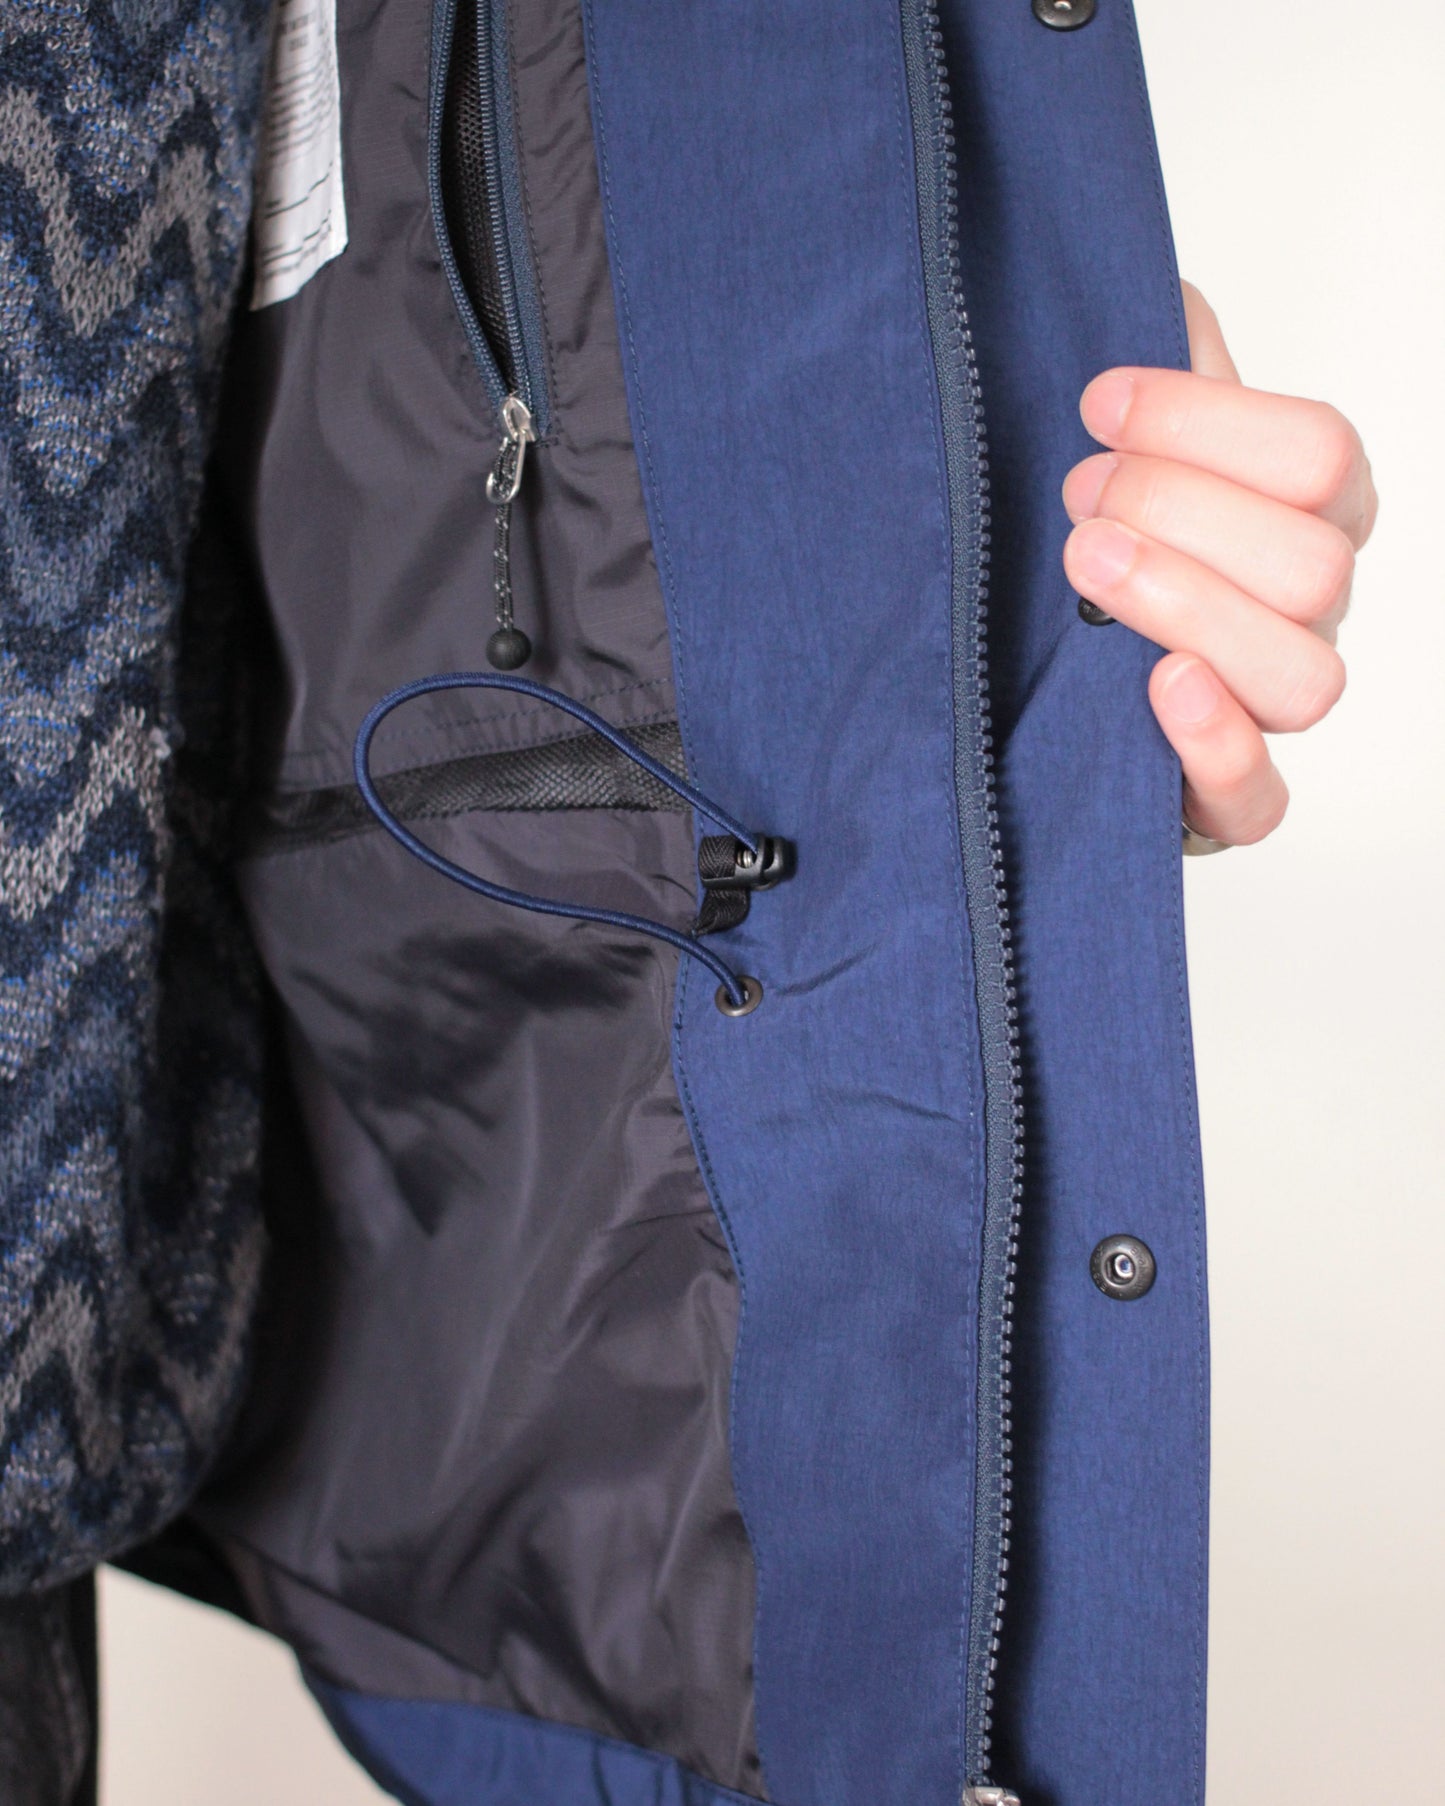 ENDS and MEANS/MOUNTAIN PARKA "Deep Sea"